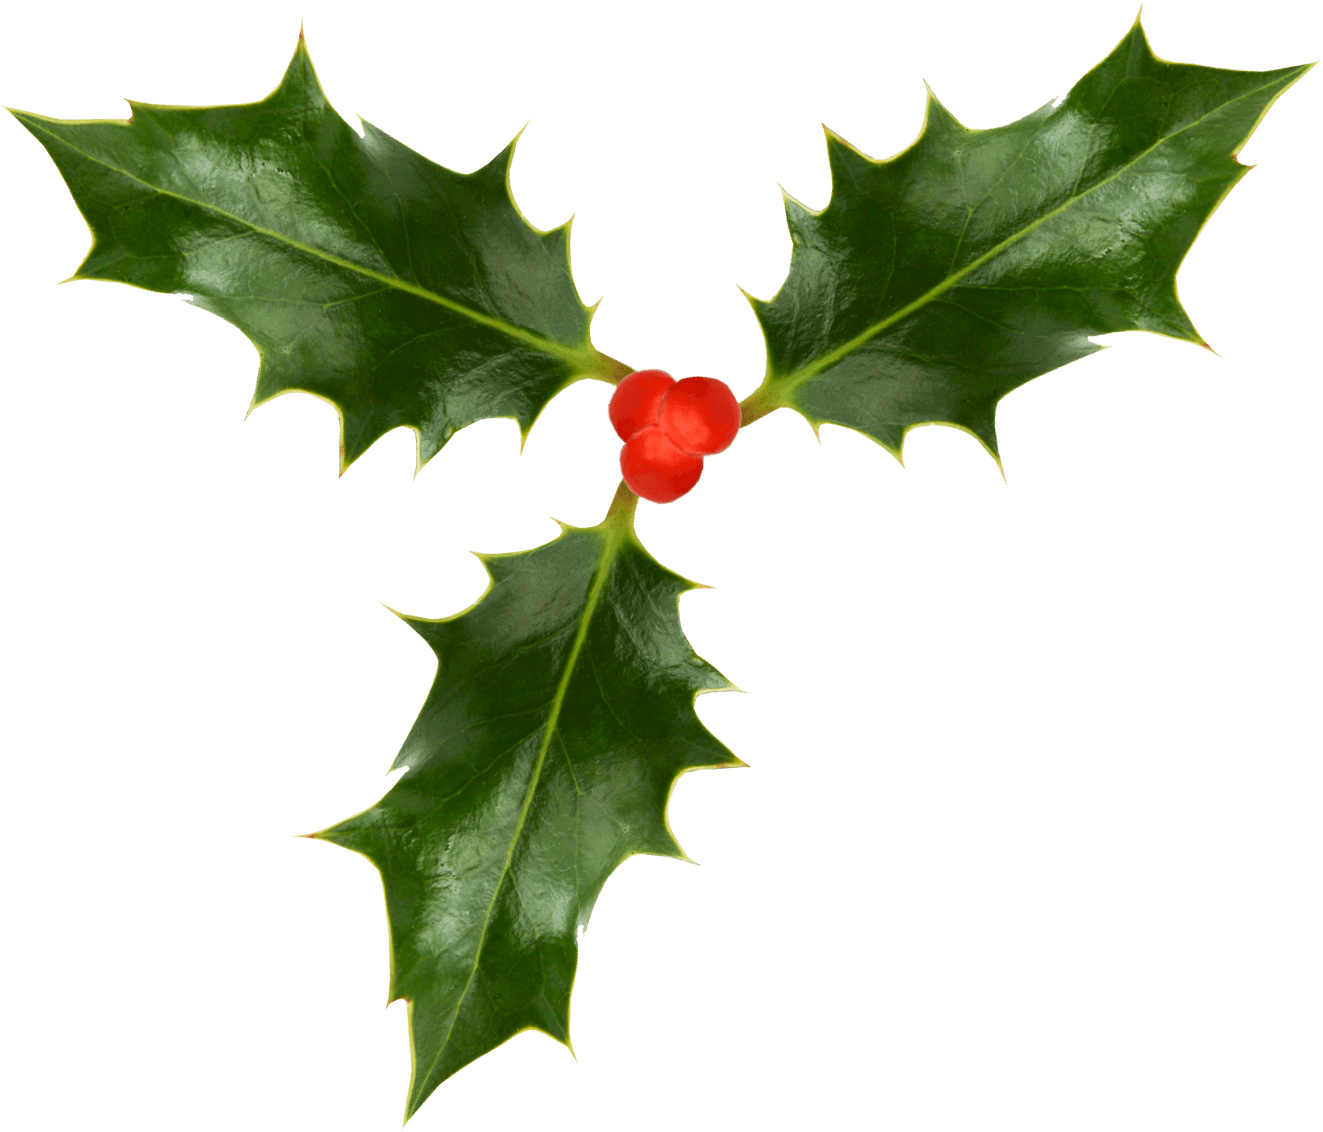 christmas holly background wallpaper